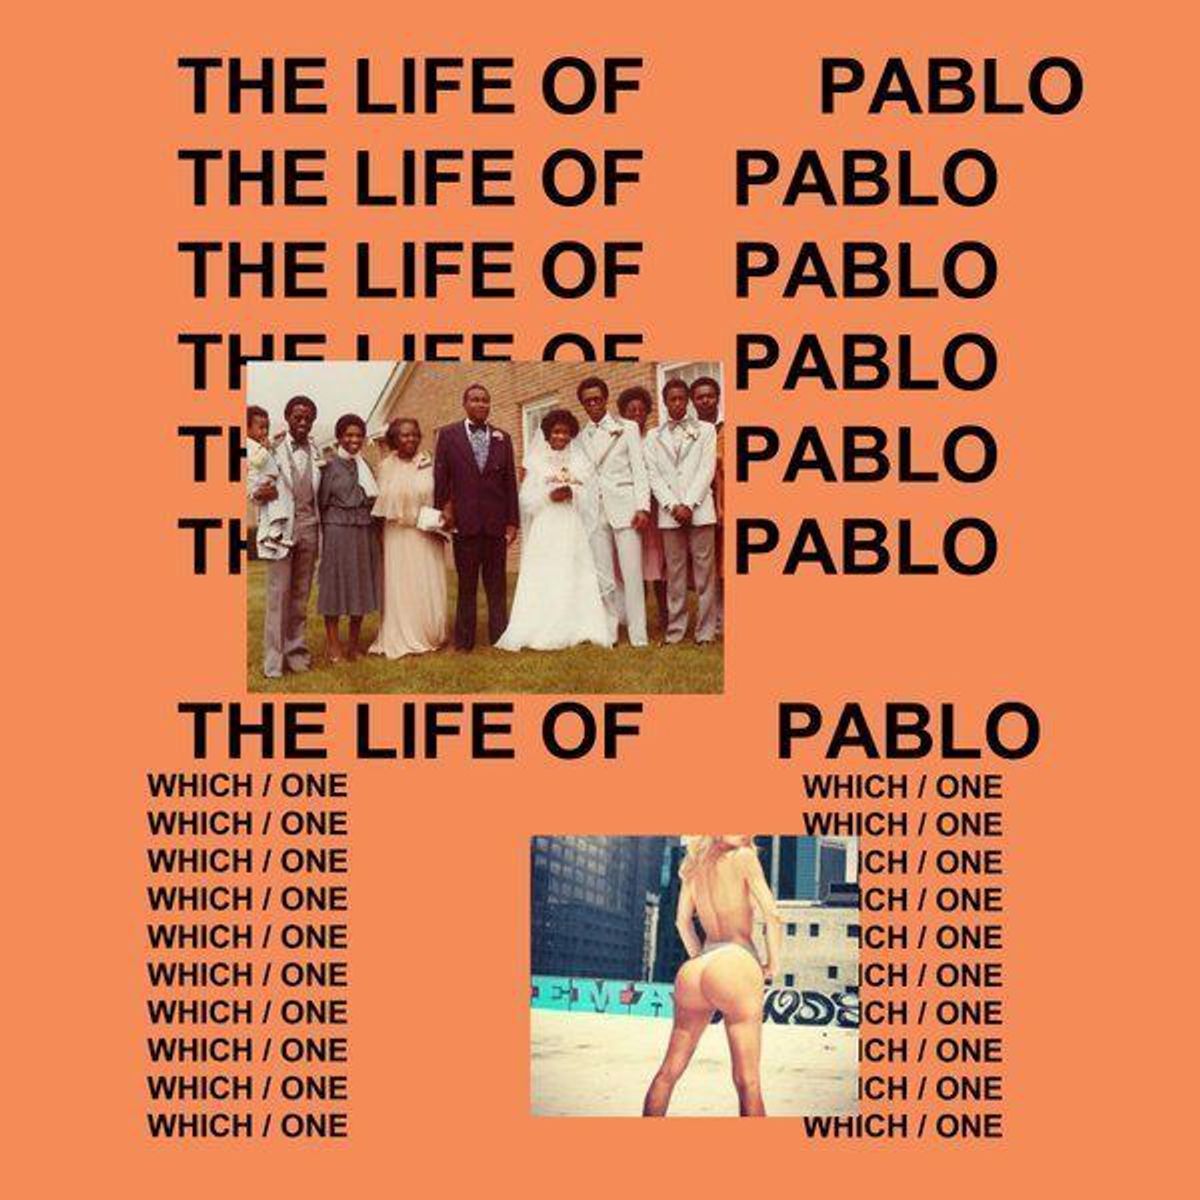 My Reaction To 'The Life of Pablo'